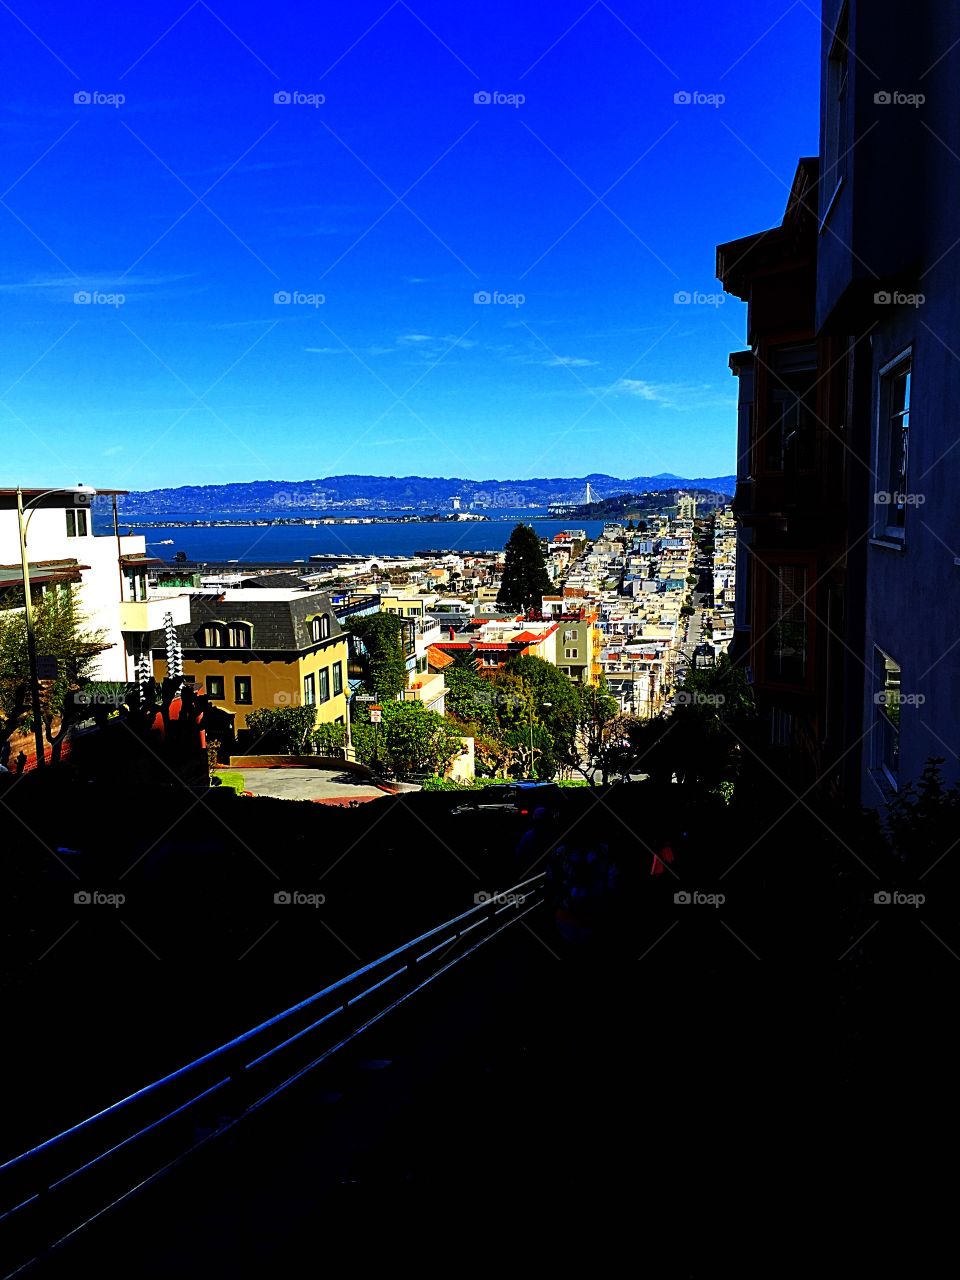 Overlooking the Bay on the top of Lombard Street in San Francisco 